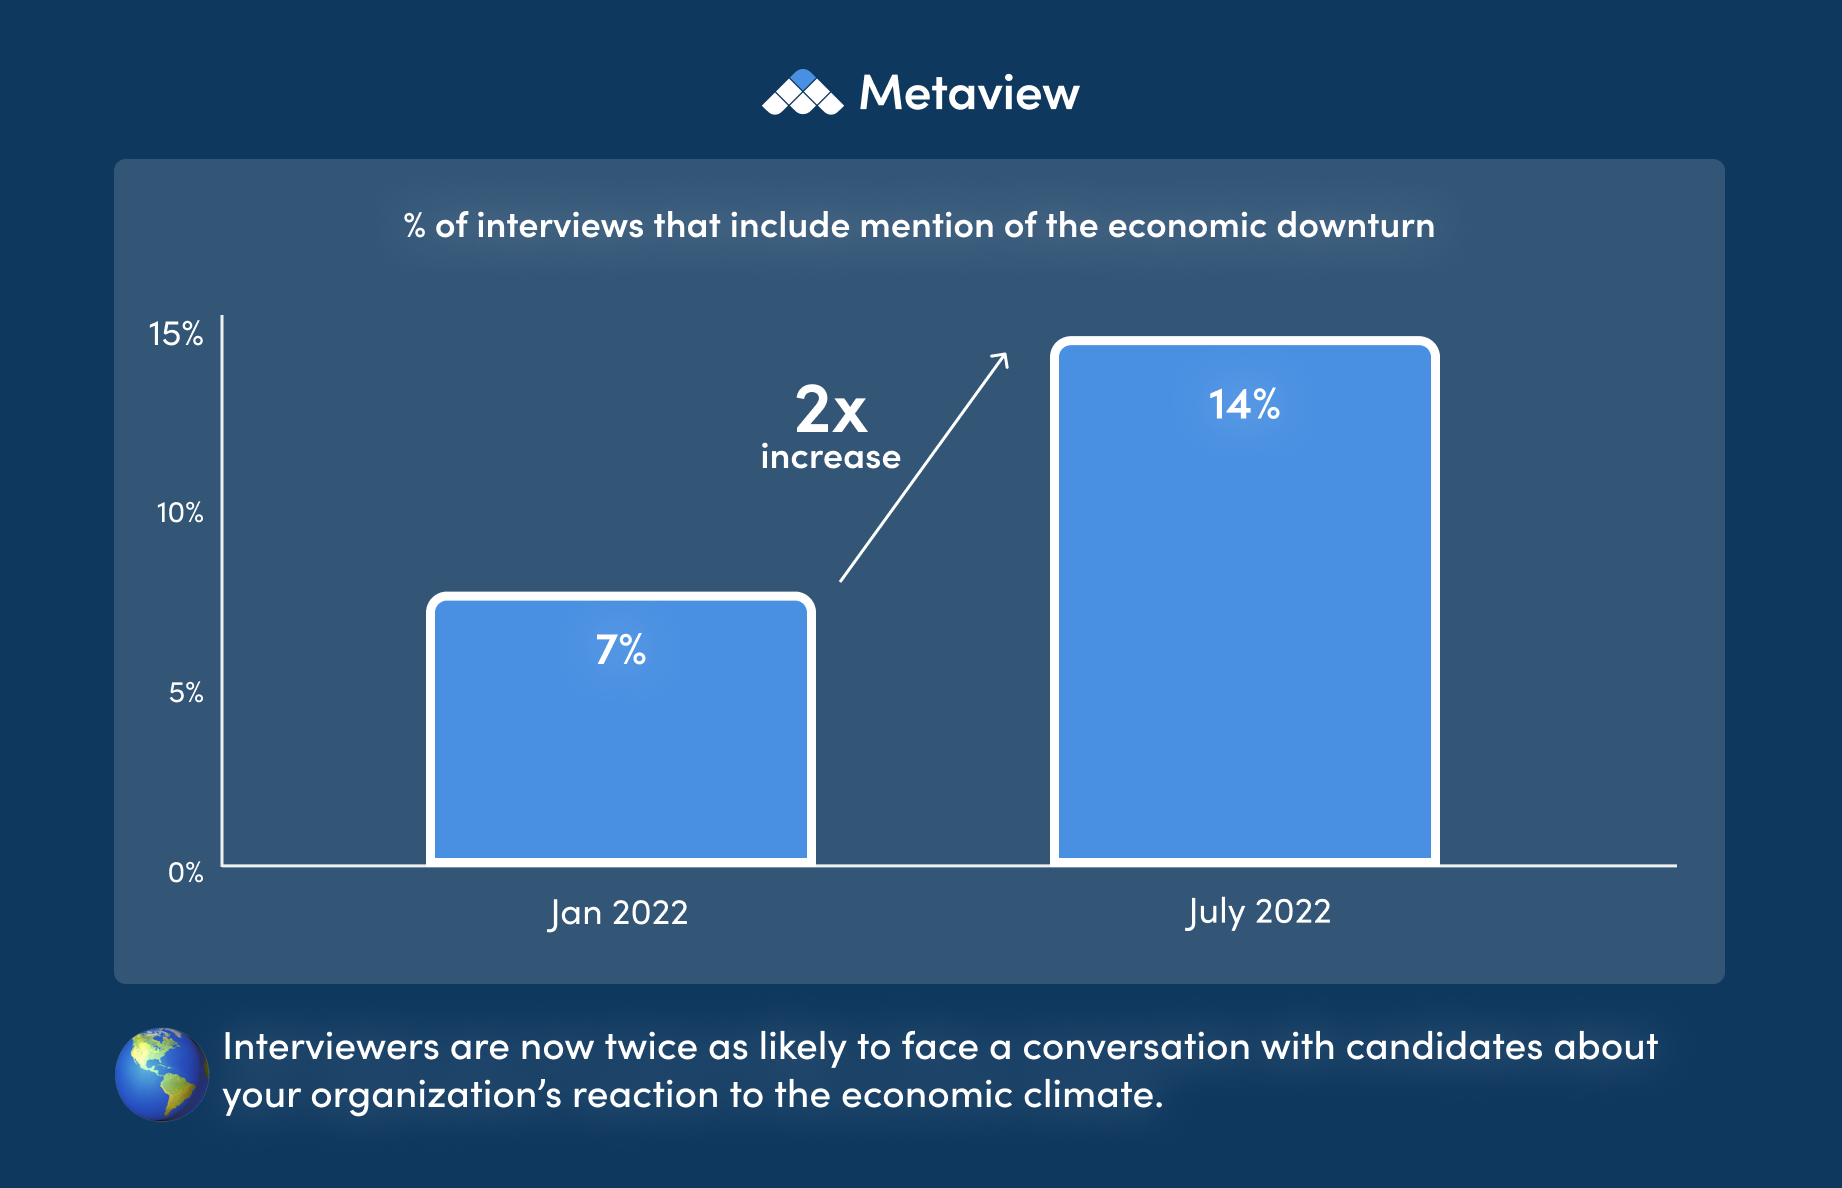 How to run effective interviews in a market downturn